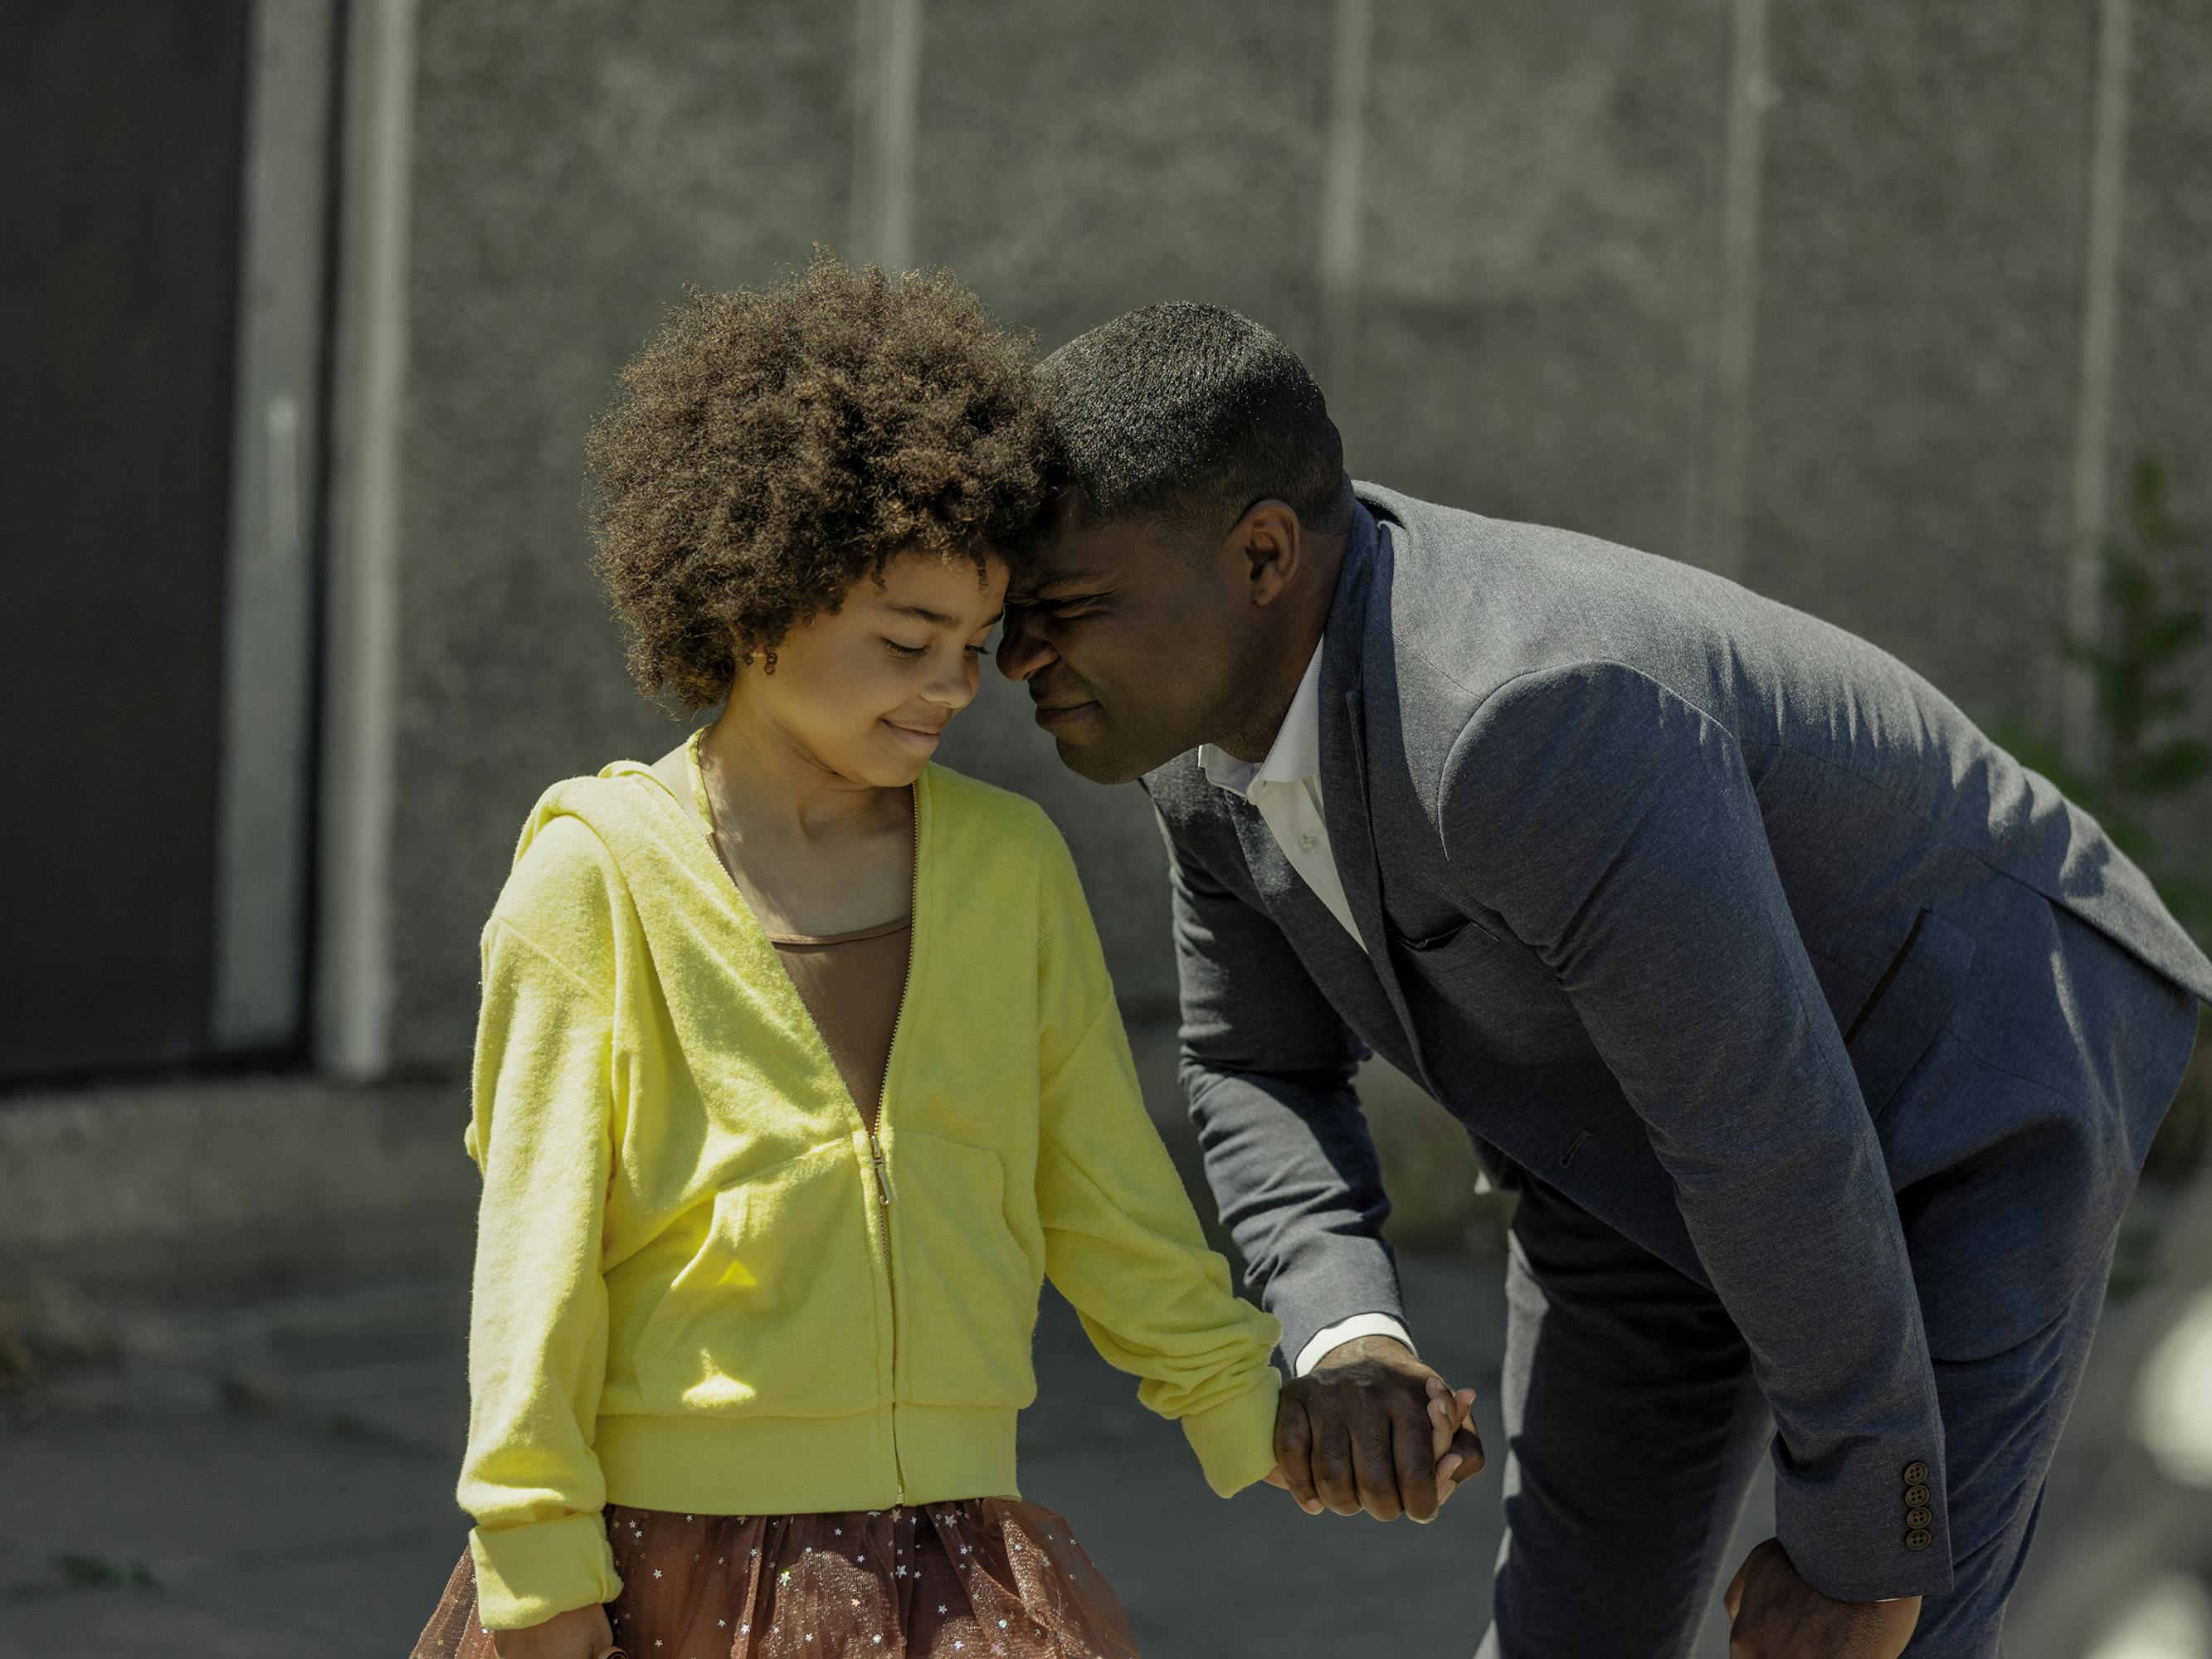 Laura (Amelie Dokubo) wears a neon yellow hoodie over a brown dress. Dayo (David Oyelowo) leans over and holds Laura’s hand.